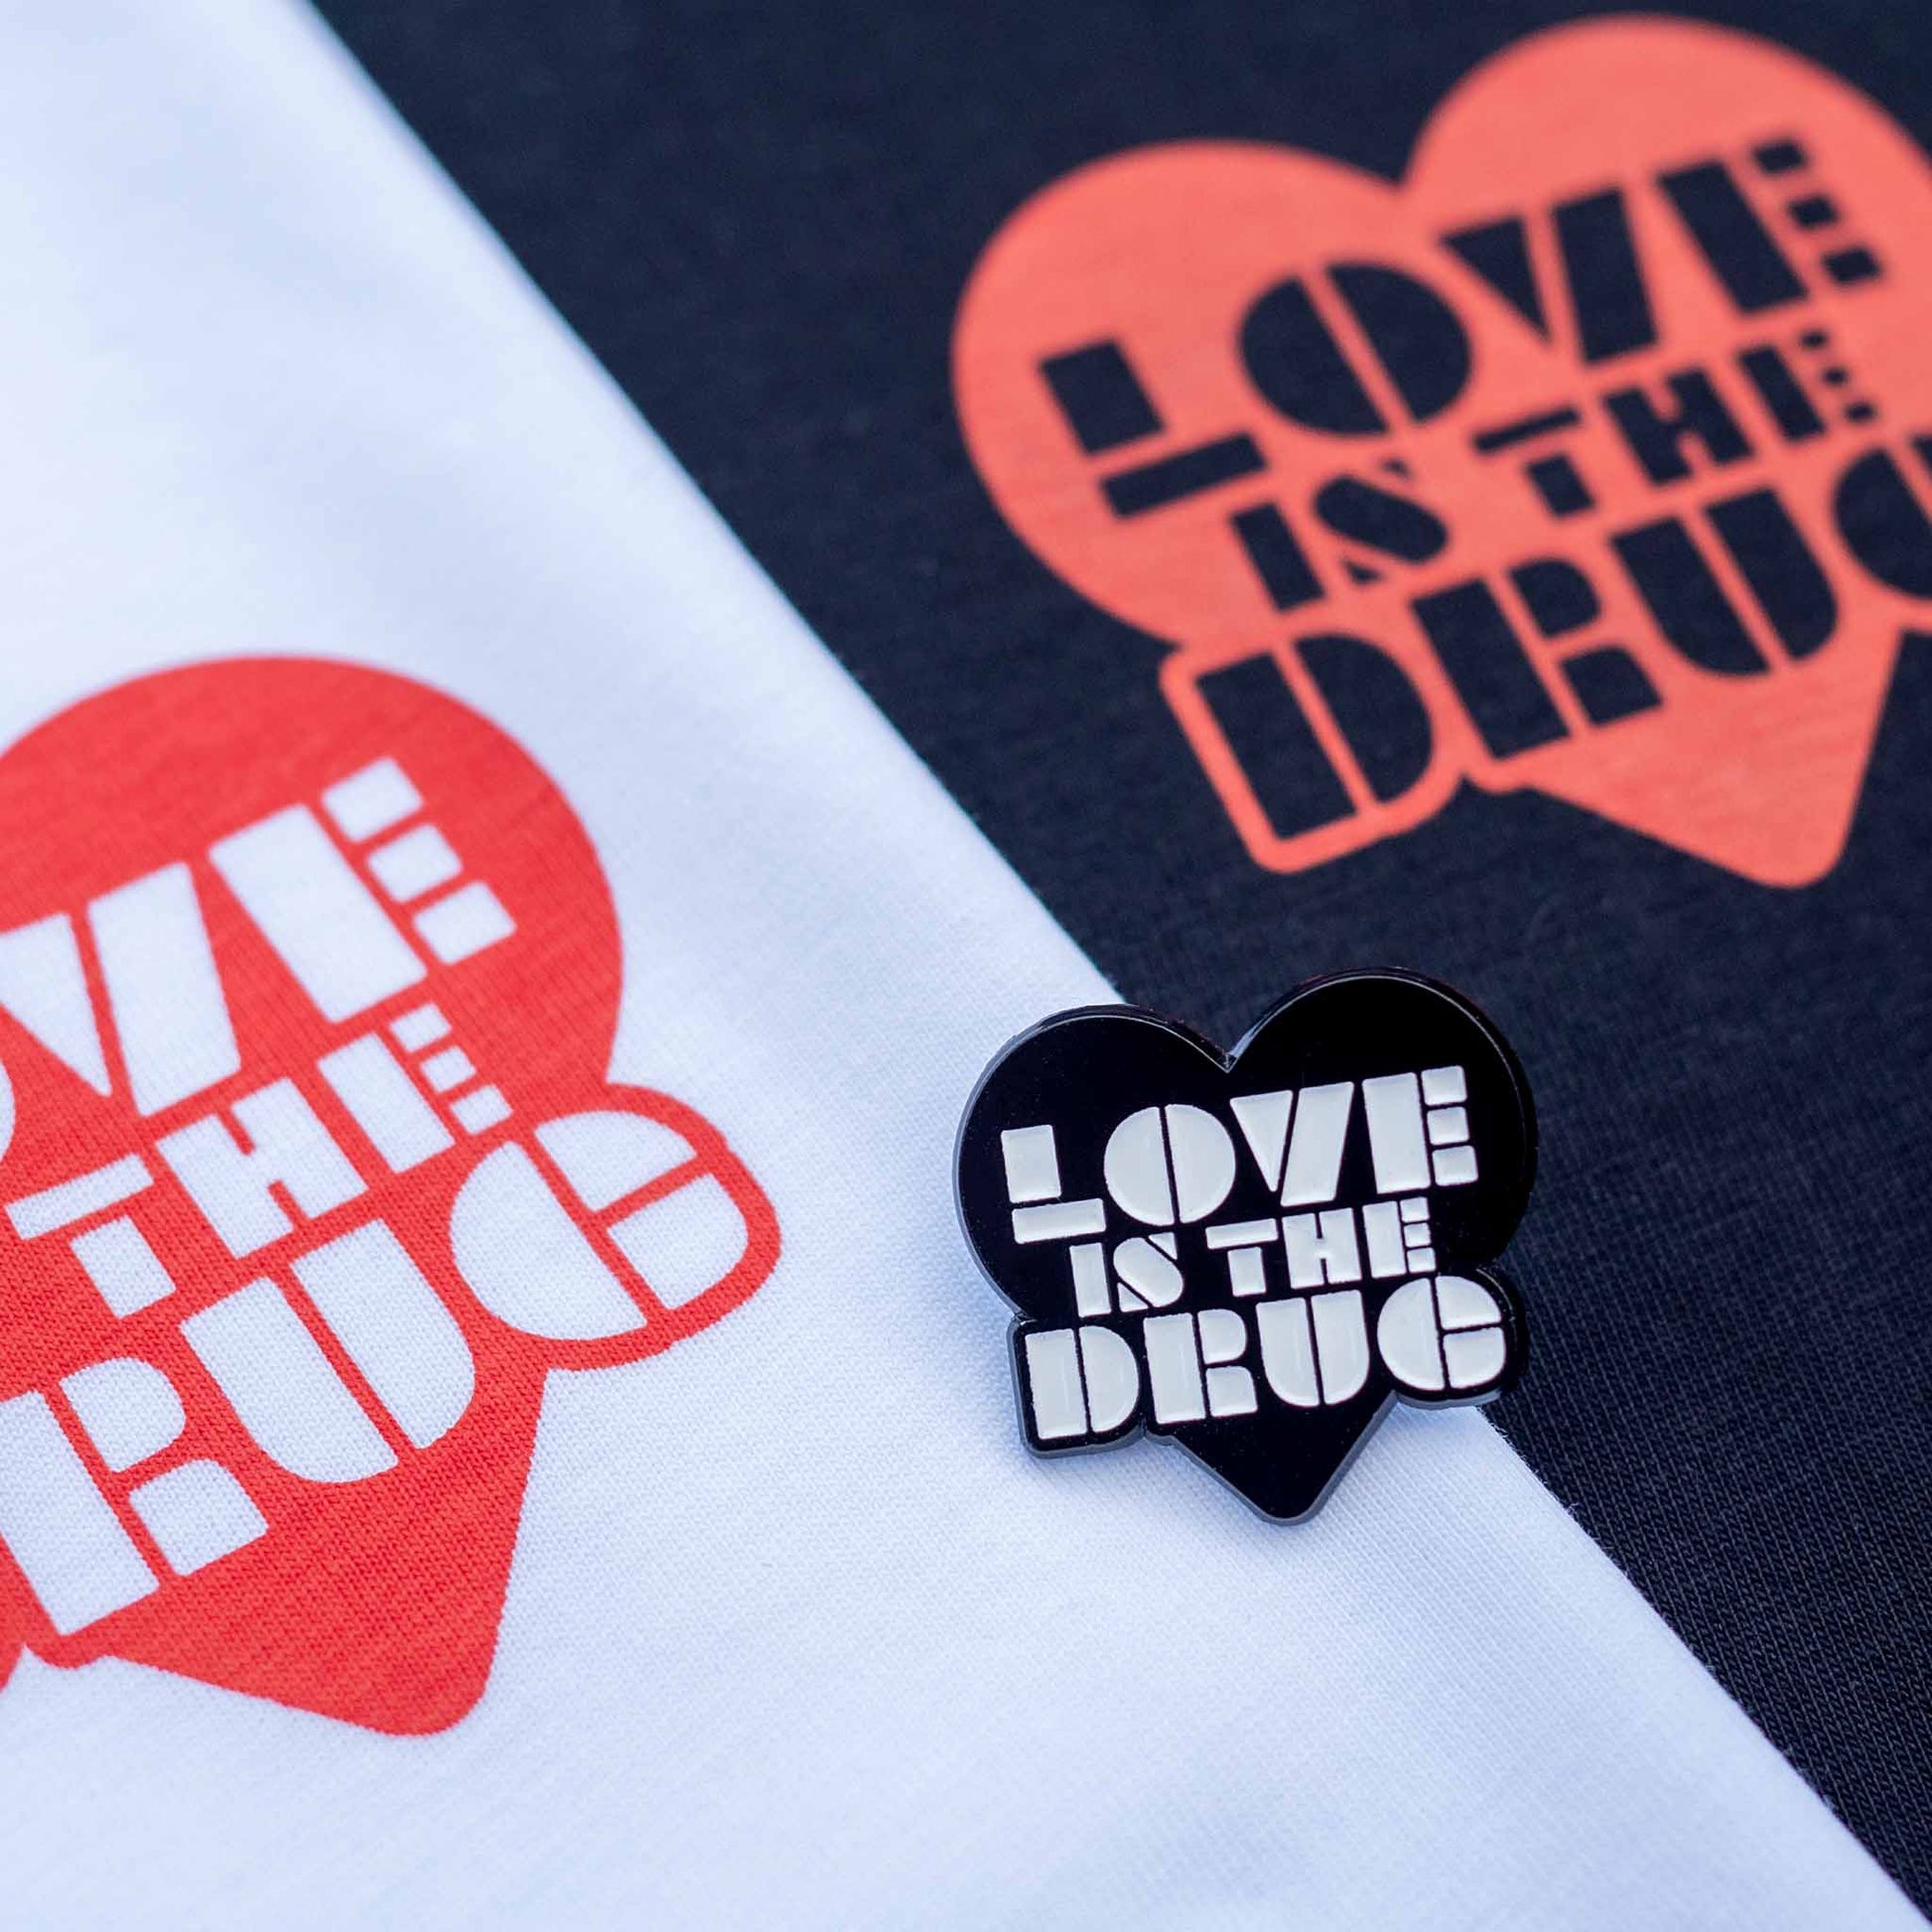 Love is the drug pin badge  Black heart with type design